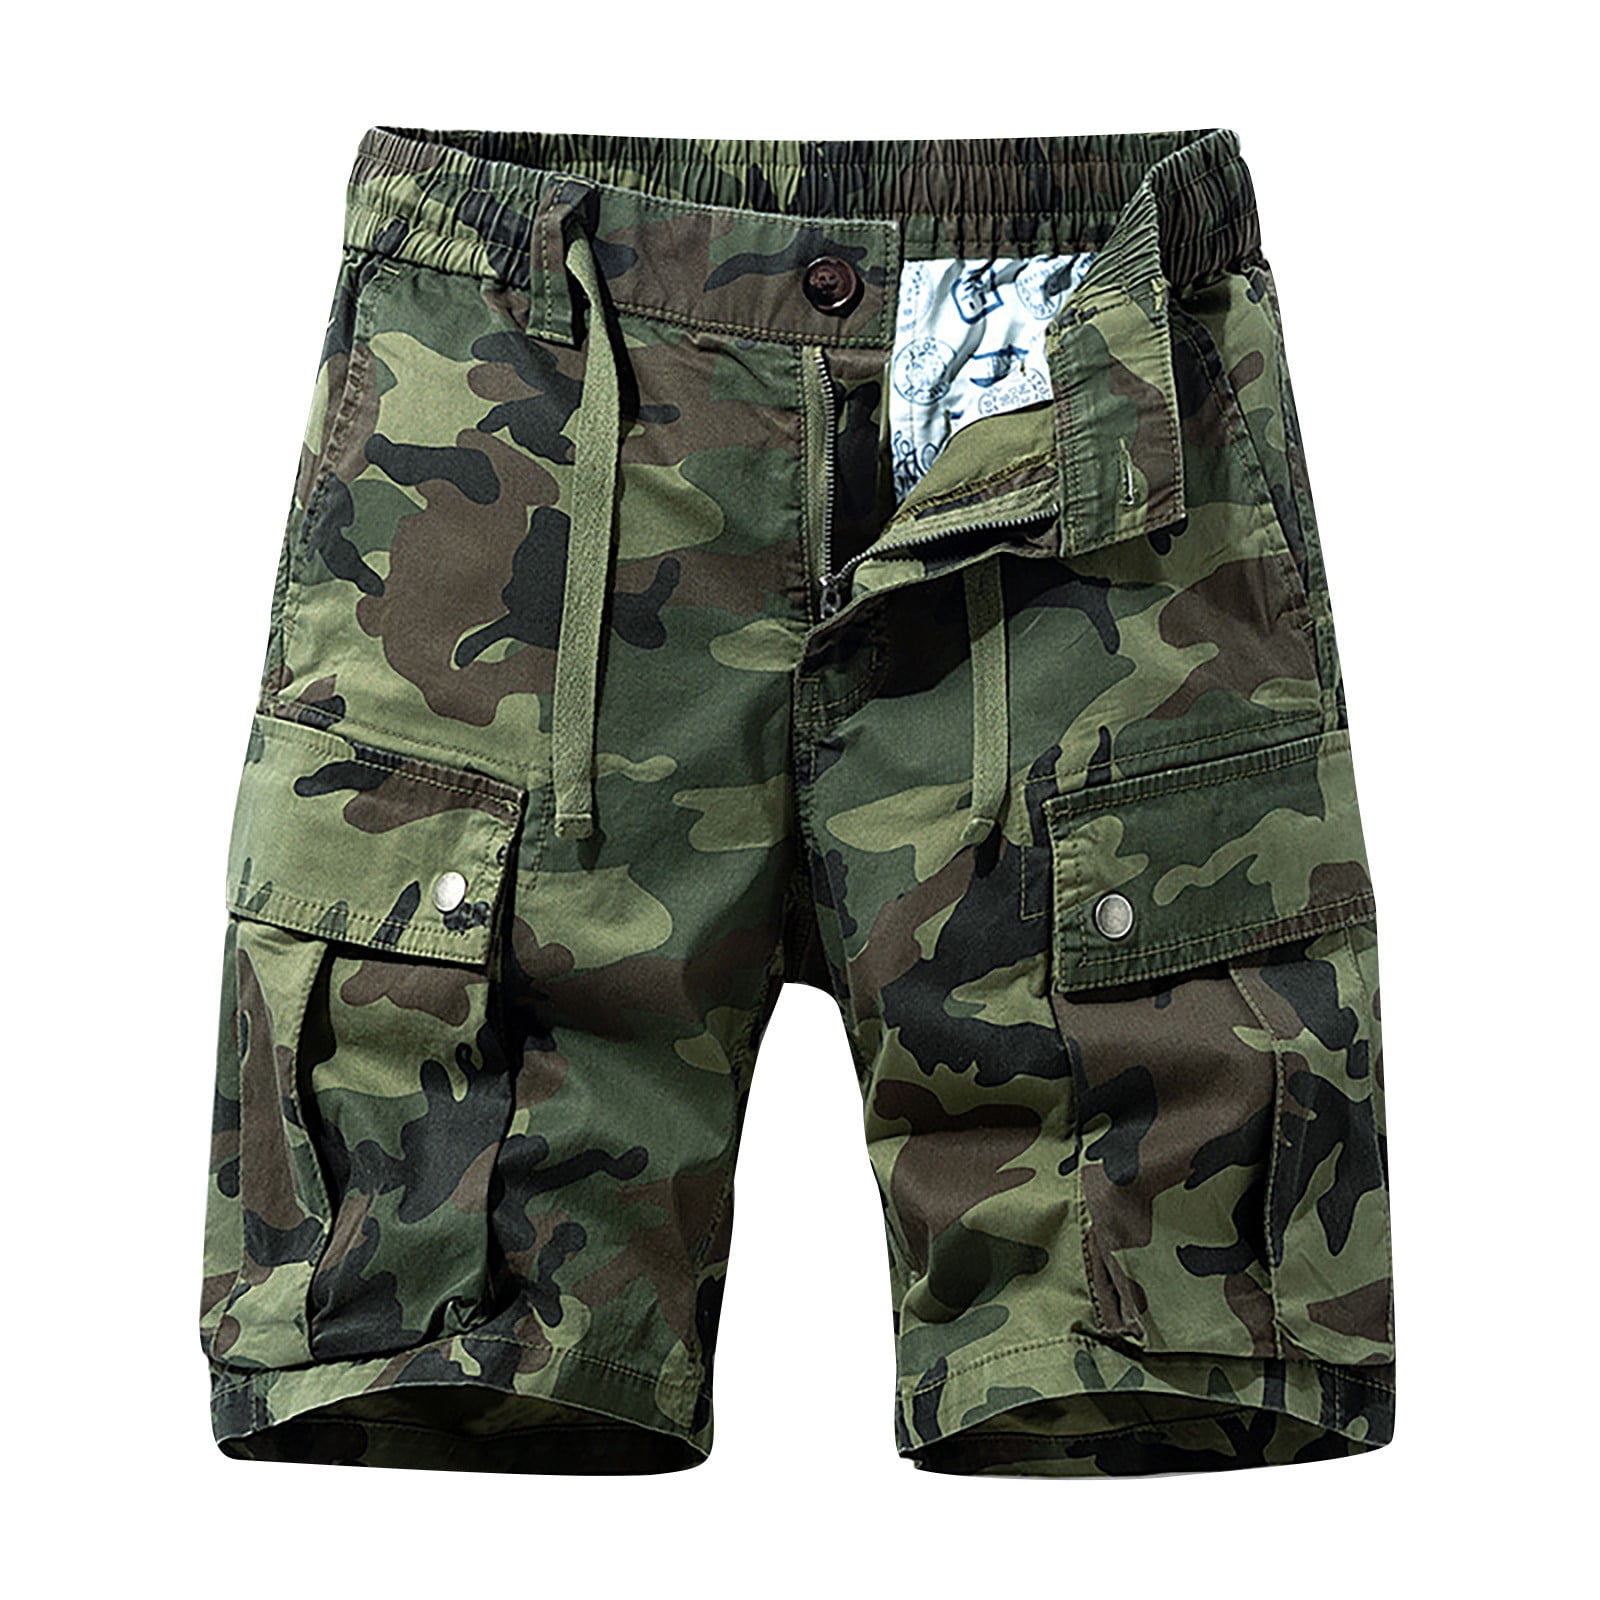 YYDGH Mens Camouflage Cargo Shorts Casual Elastic Waist Drawstring Short  Pants Lightweight Outdoor Multi Pocket Work Shorts Army Green L 